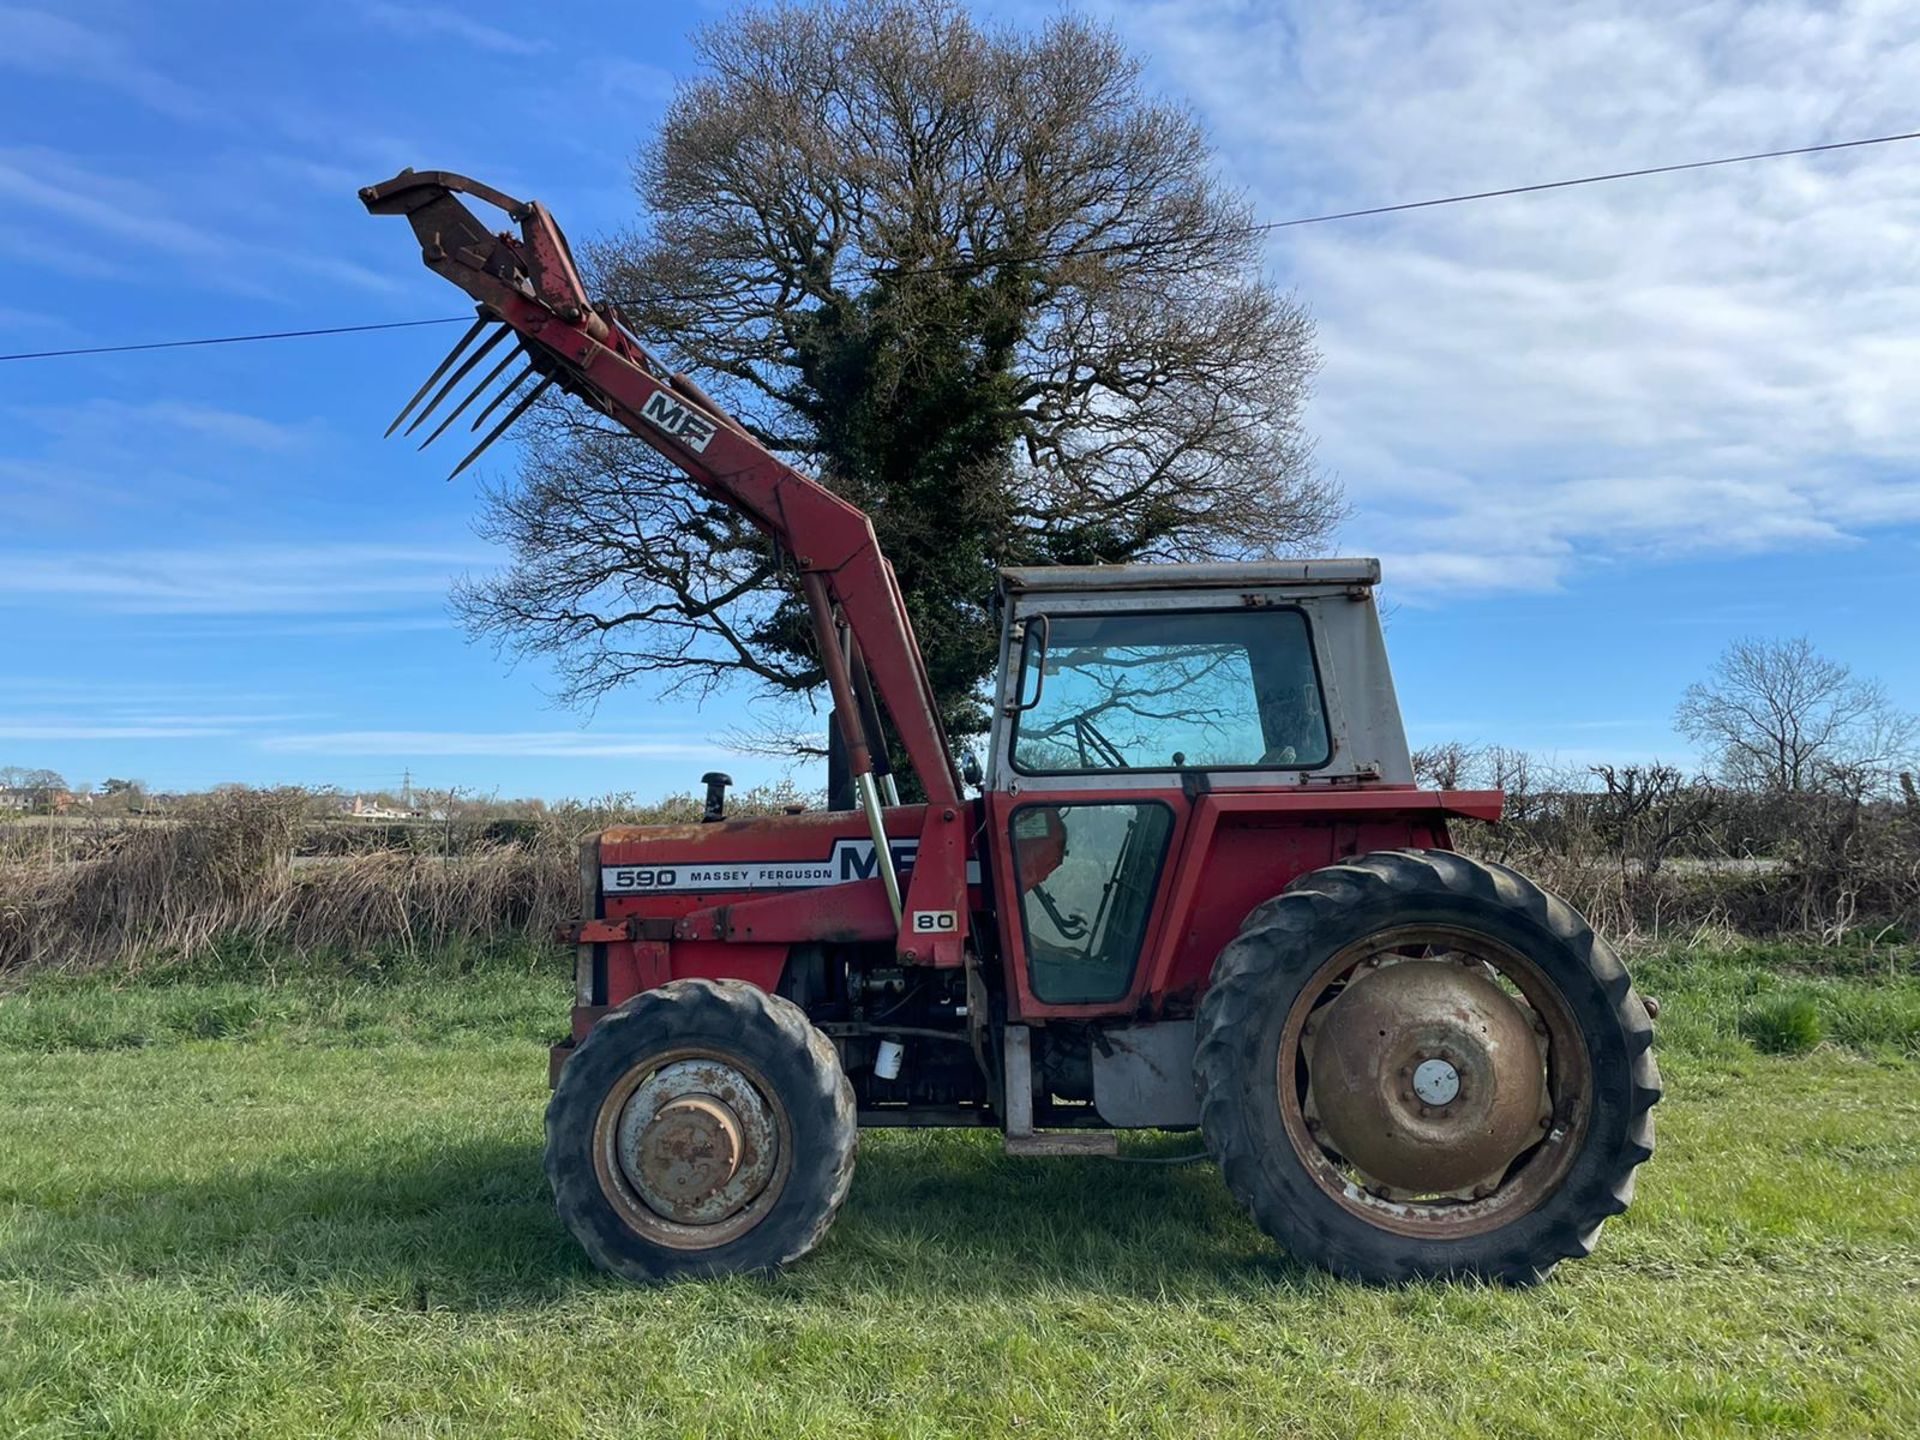 1999 MASSEY FERGUSON MG590 TRACTOR WITH LOADER, RUNS DRIVES AND LIFTS, CABBED *PLUS VAT* - Image 2 of 9